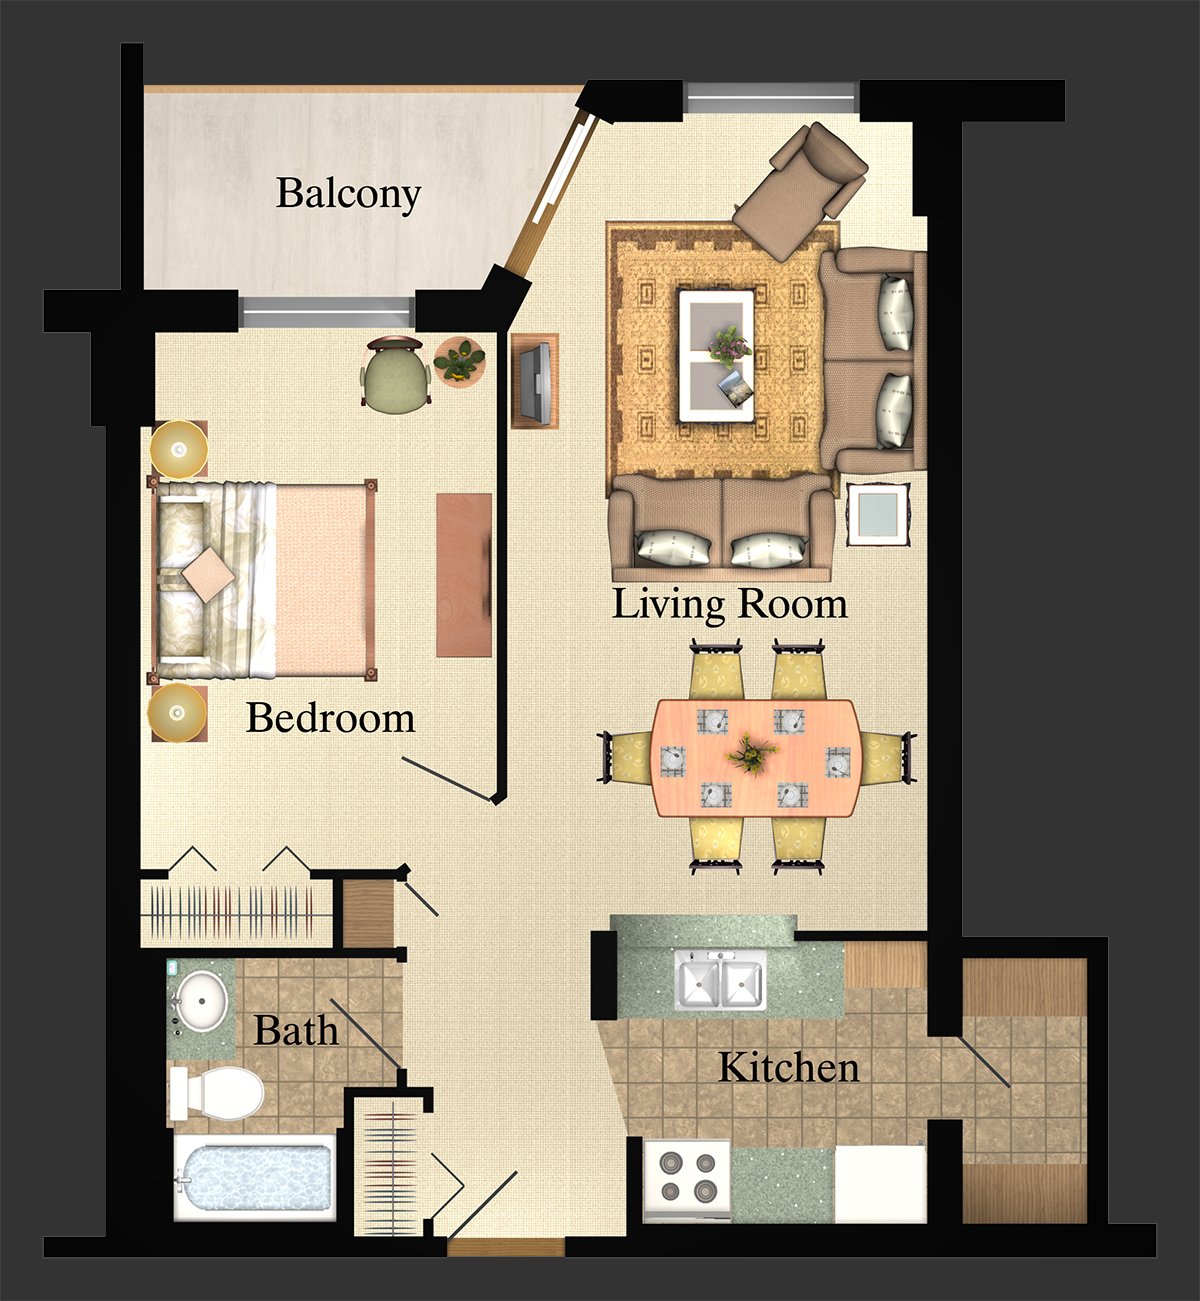 1 bedroom apartment layout - for rent in London, Ontario